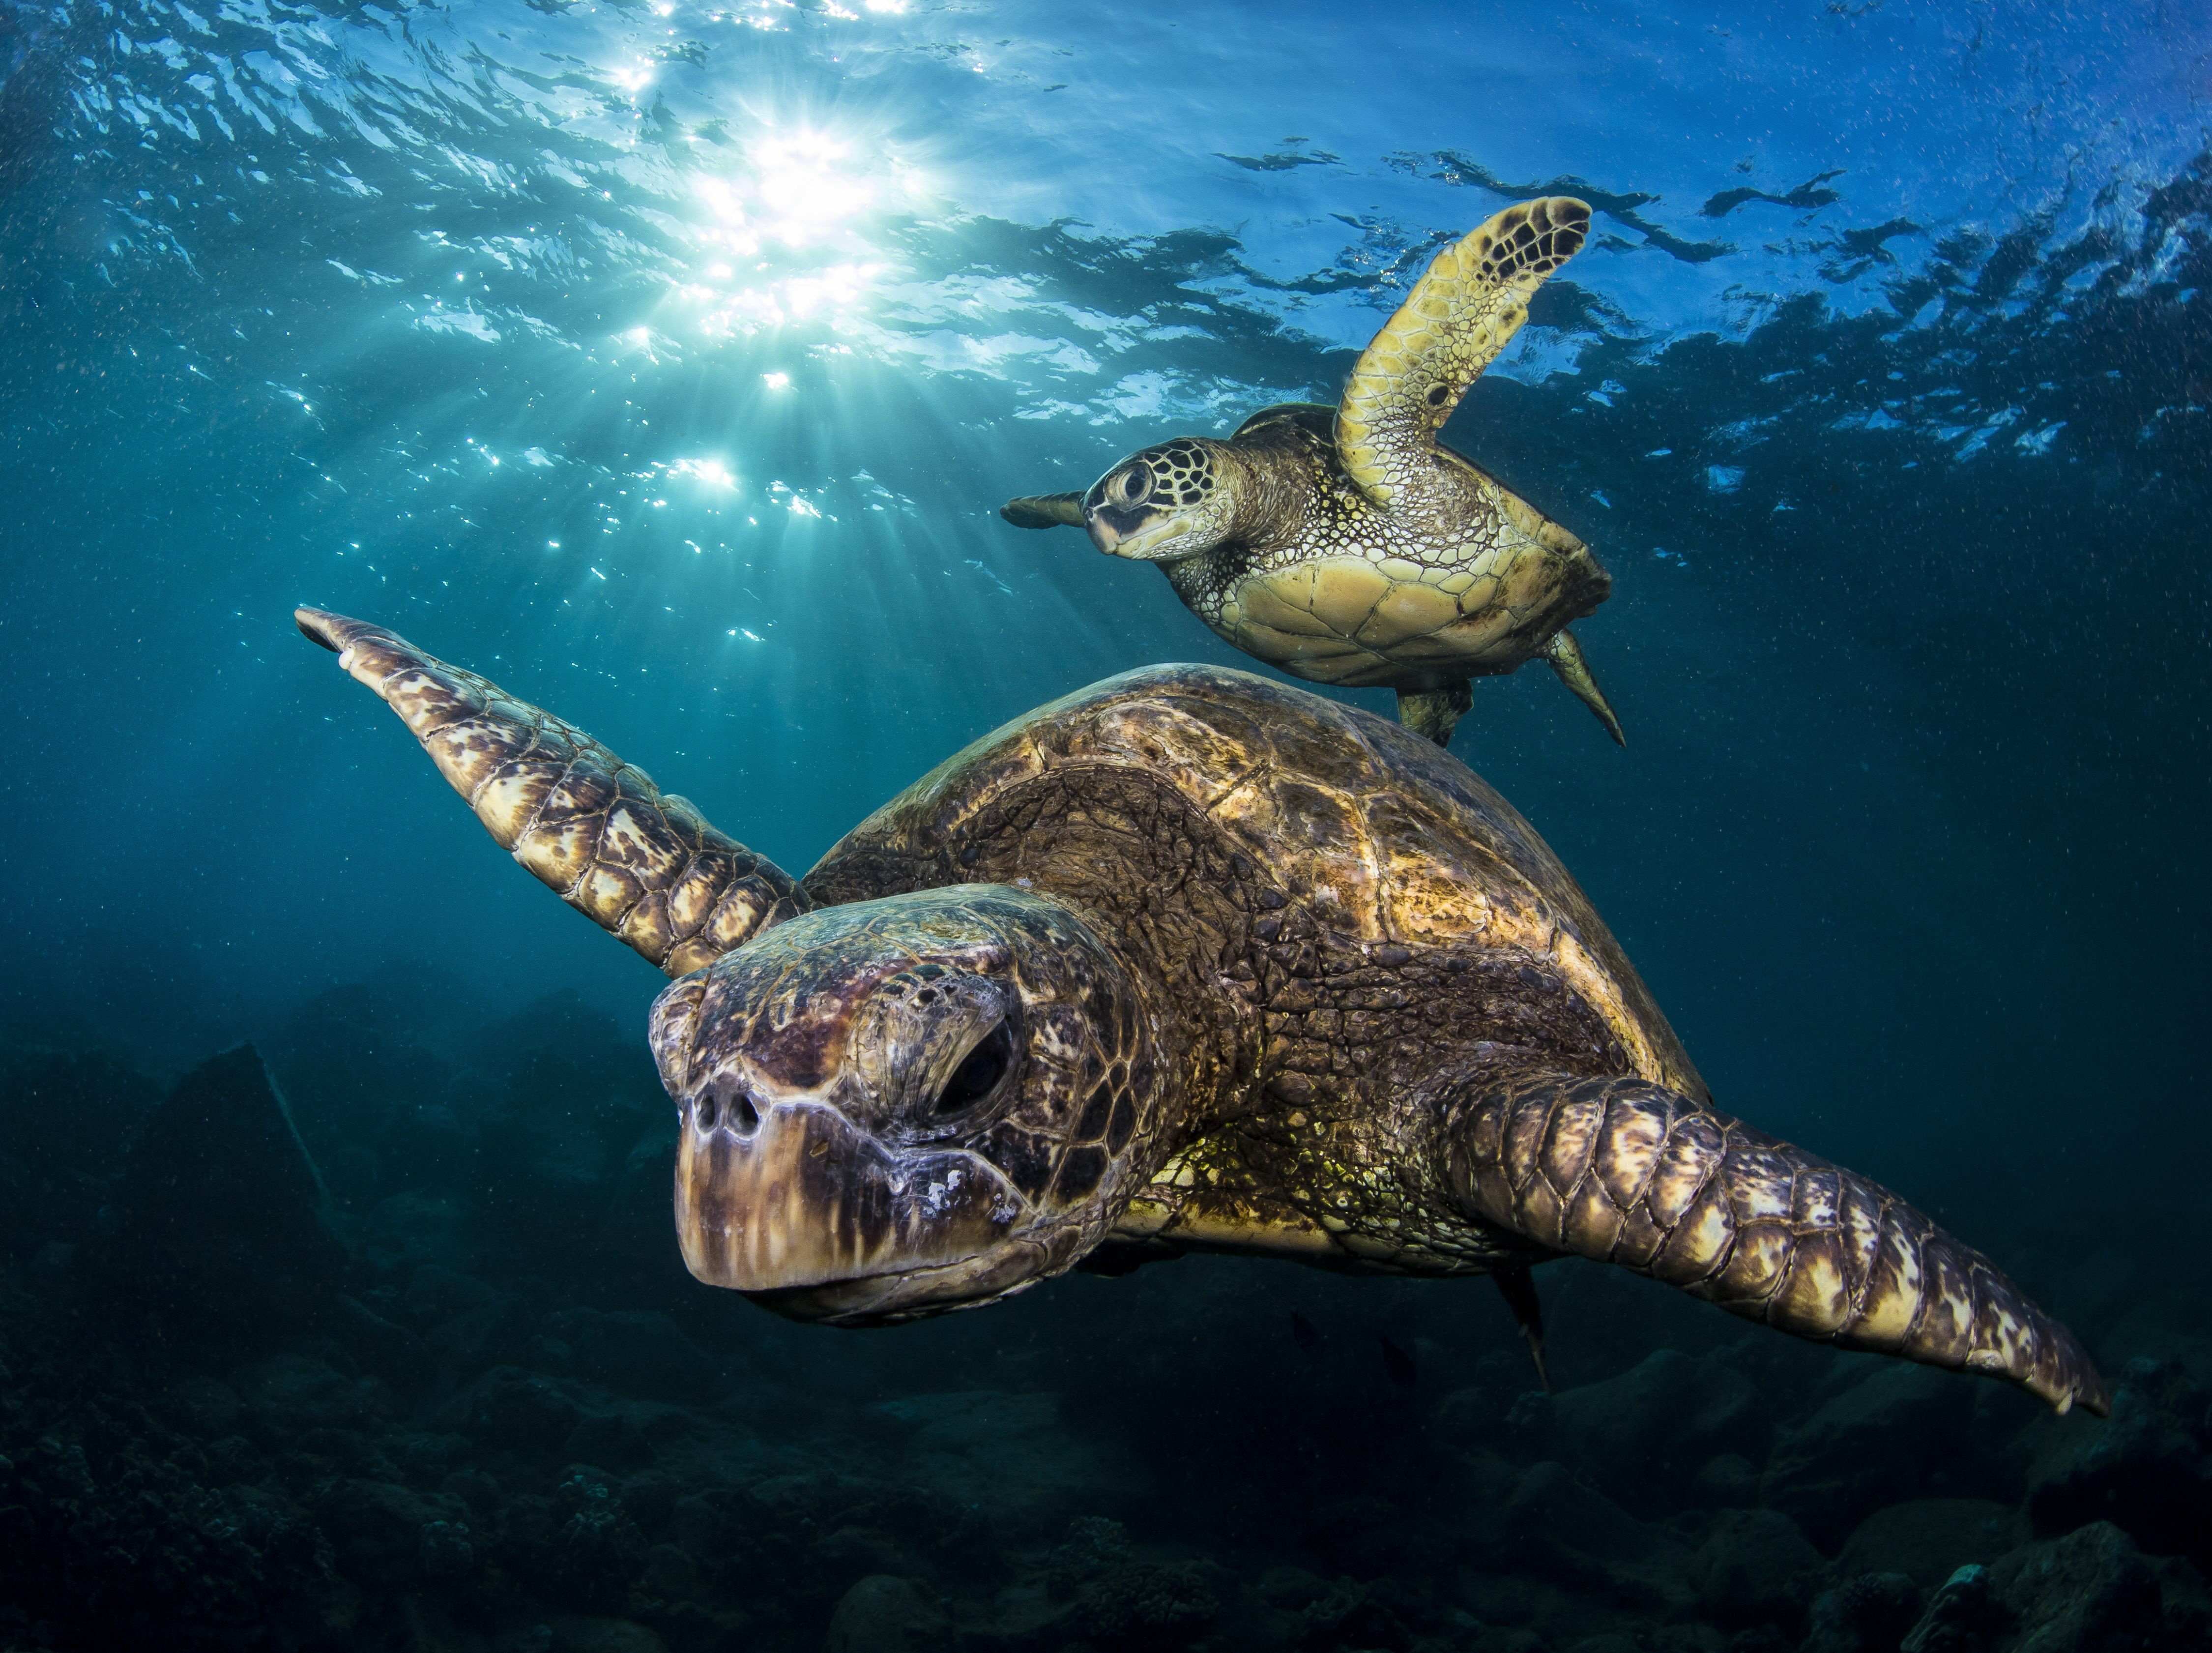 Tony Cherbas' "Honu Generations Young Old" photo of a pair of young and old sea turtles.